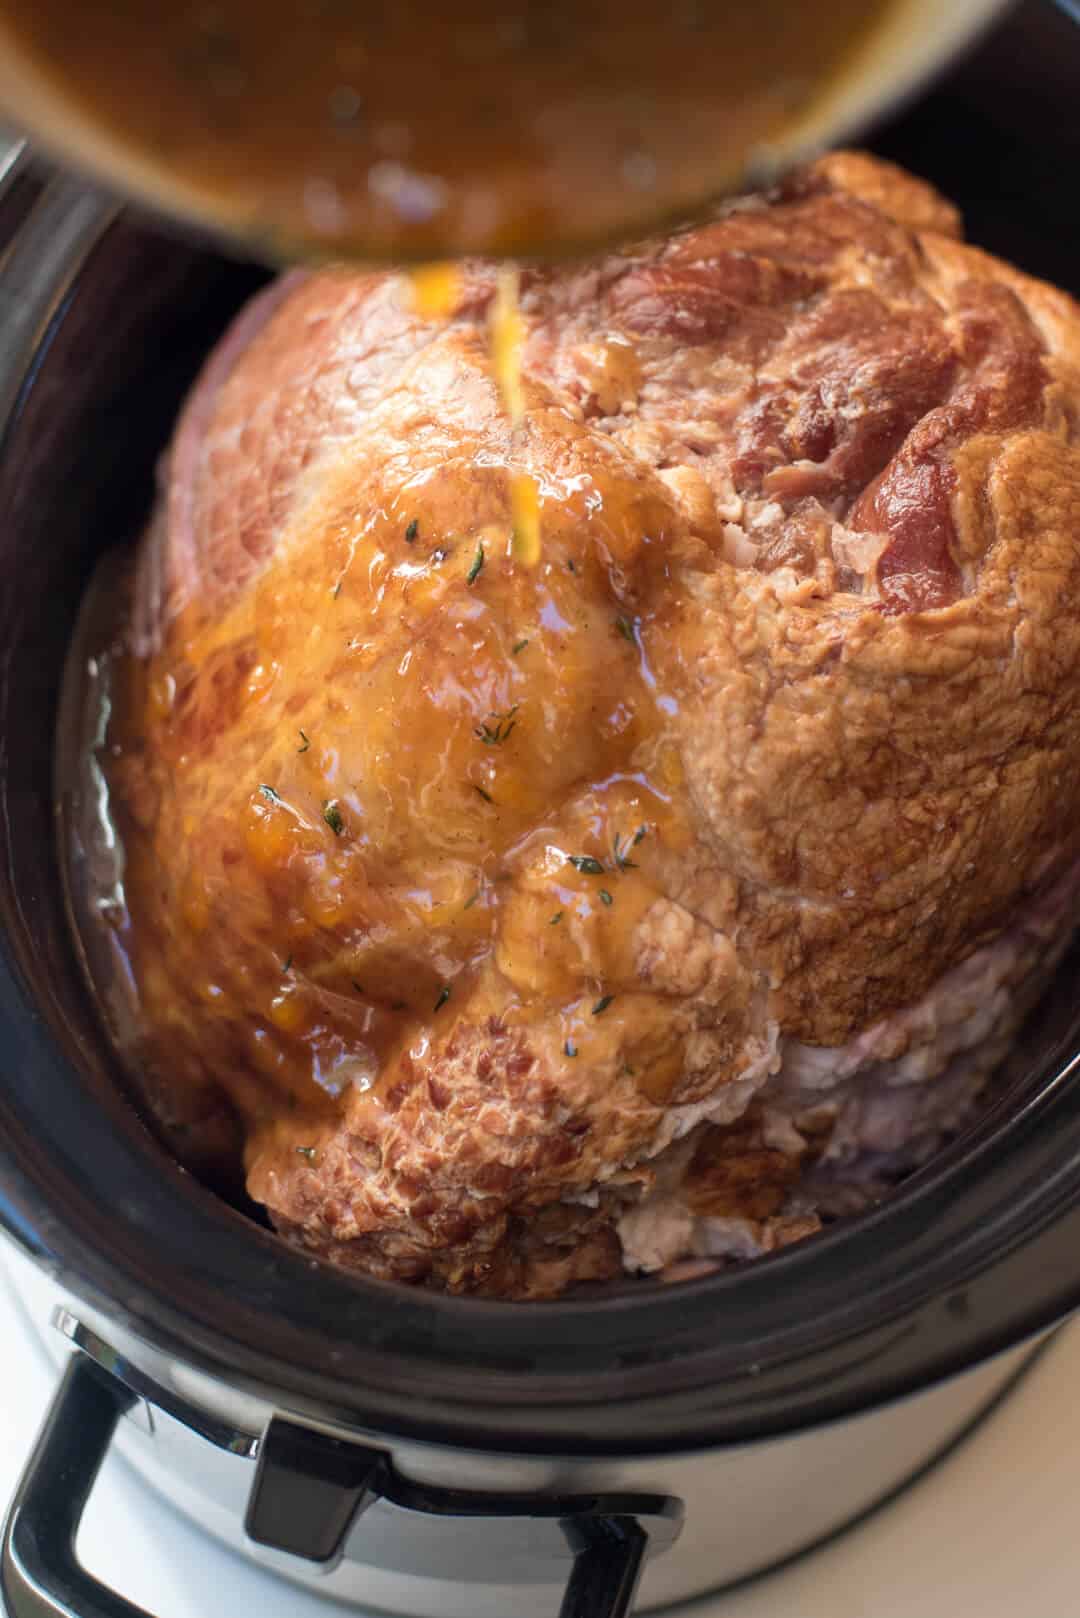 Pouring the Peach Thyme Glaze over the spiral sliced ham in the slow cooker.